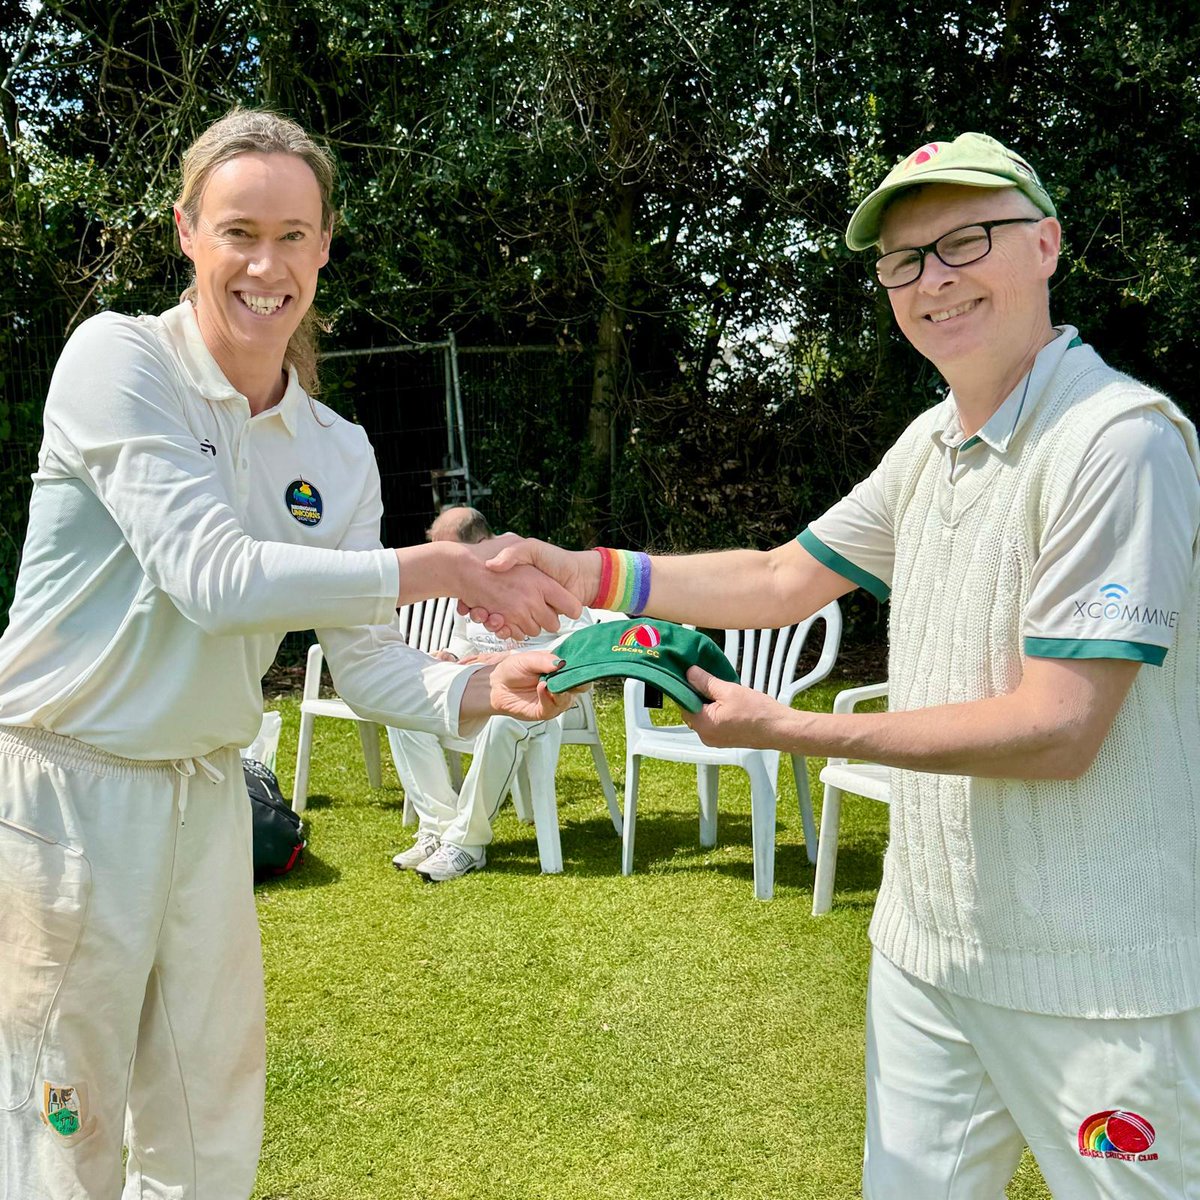 Still feeling like a zombie right now (but locals are done so I can tackle that) but in meantime this was a warm hug of a day, debuting for @Graces_Cricket - I even scored a very rare maximum!